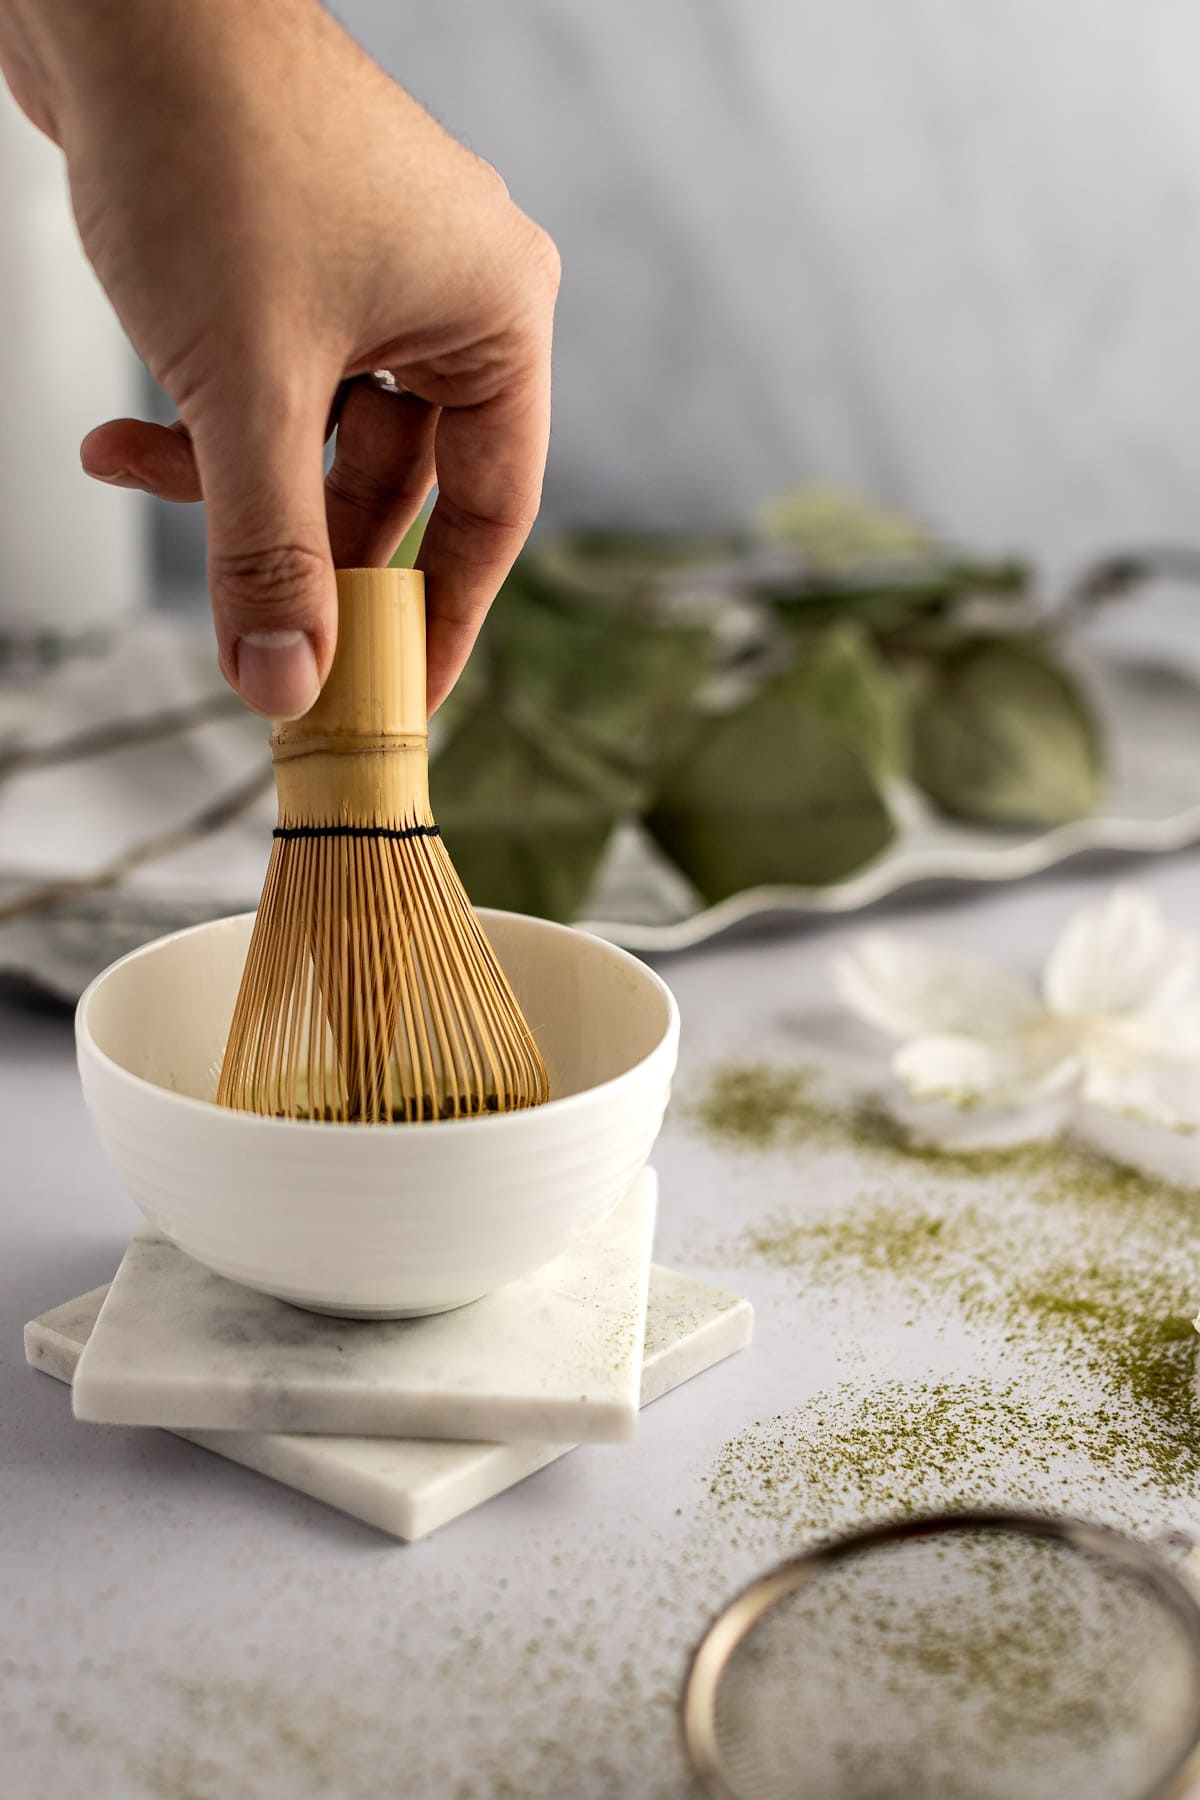 A holding a bamboo matcha whisk and stirring the matcha powder into the water to dissolve it.